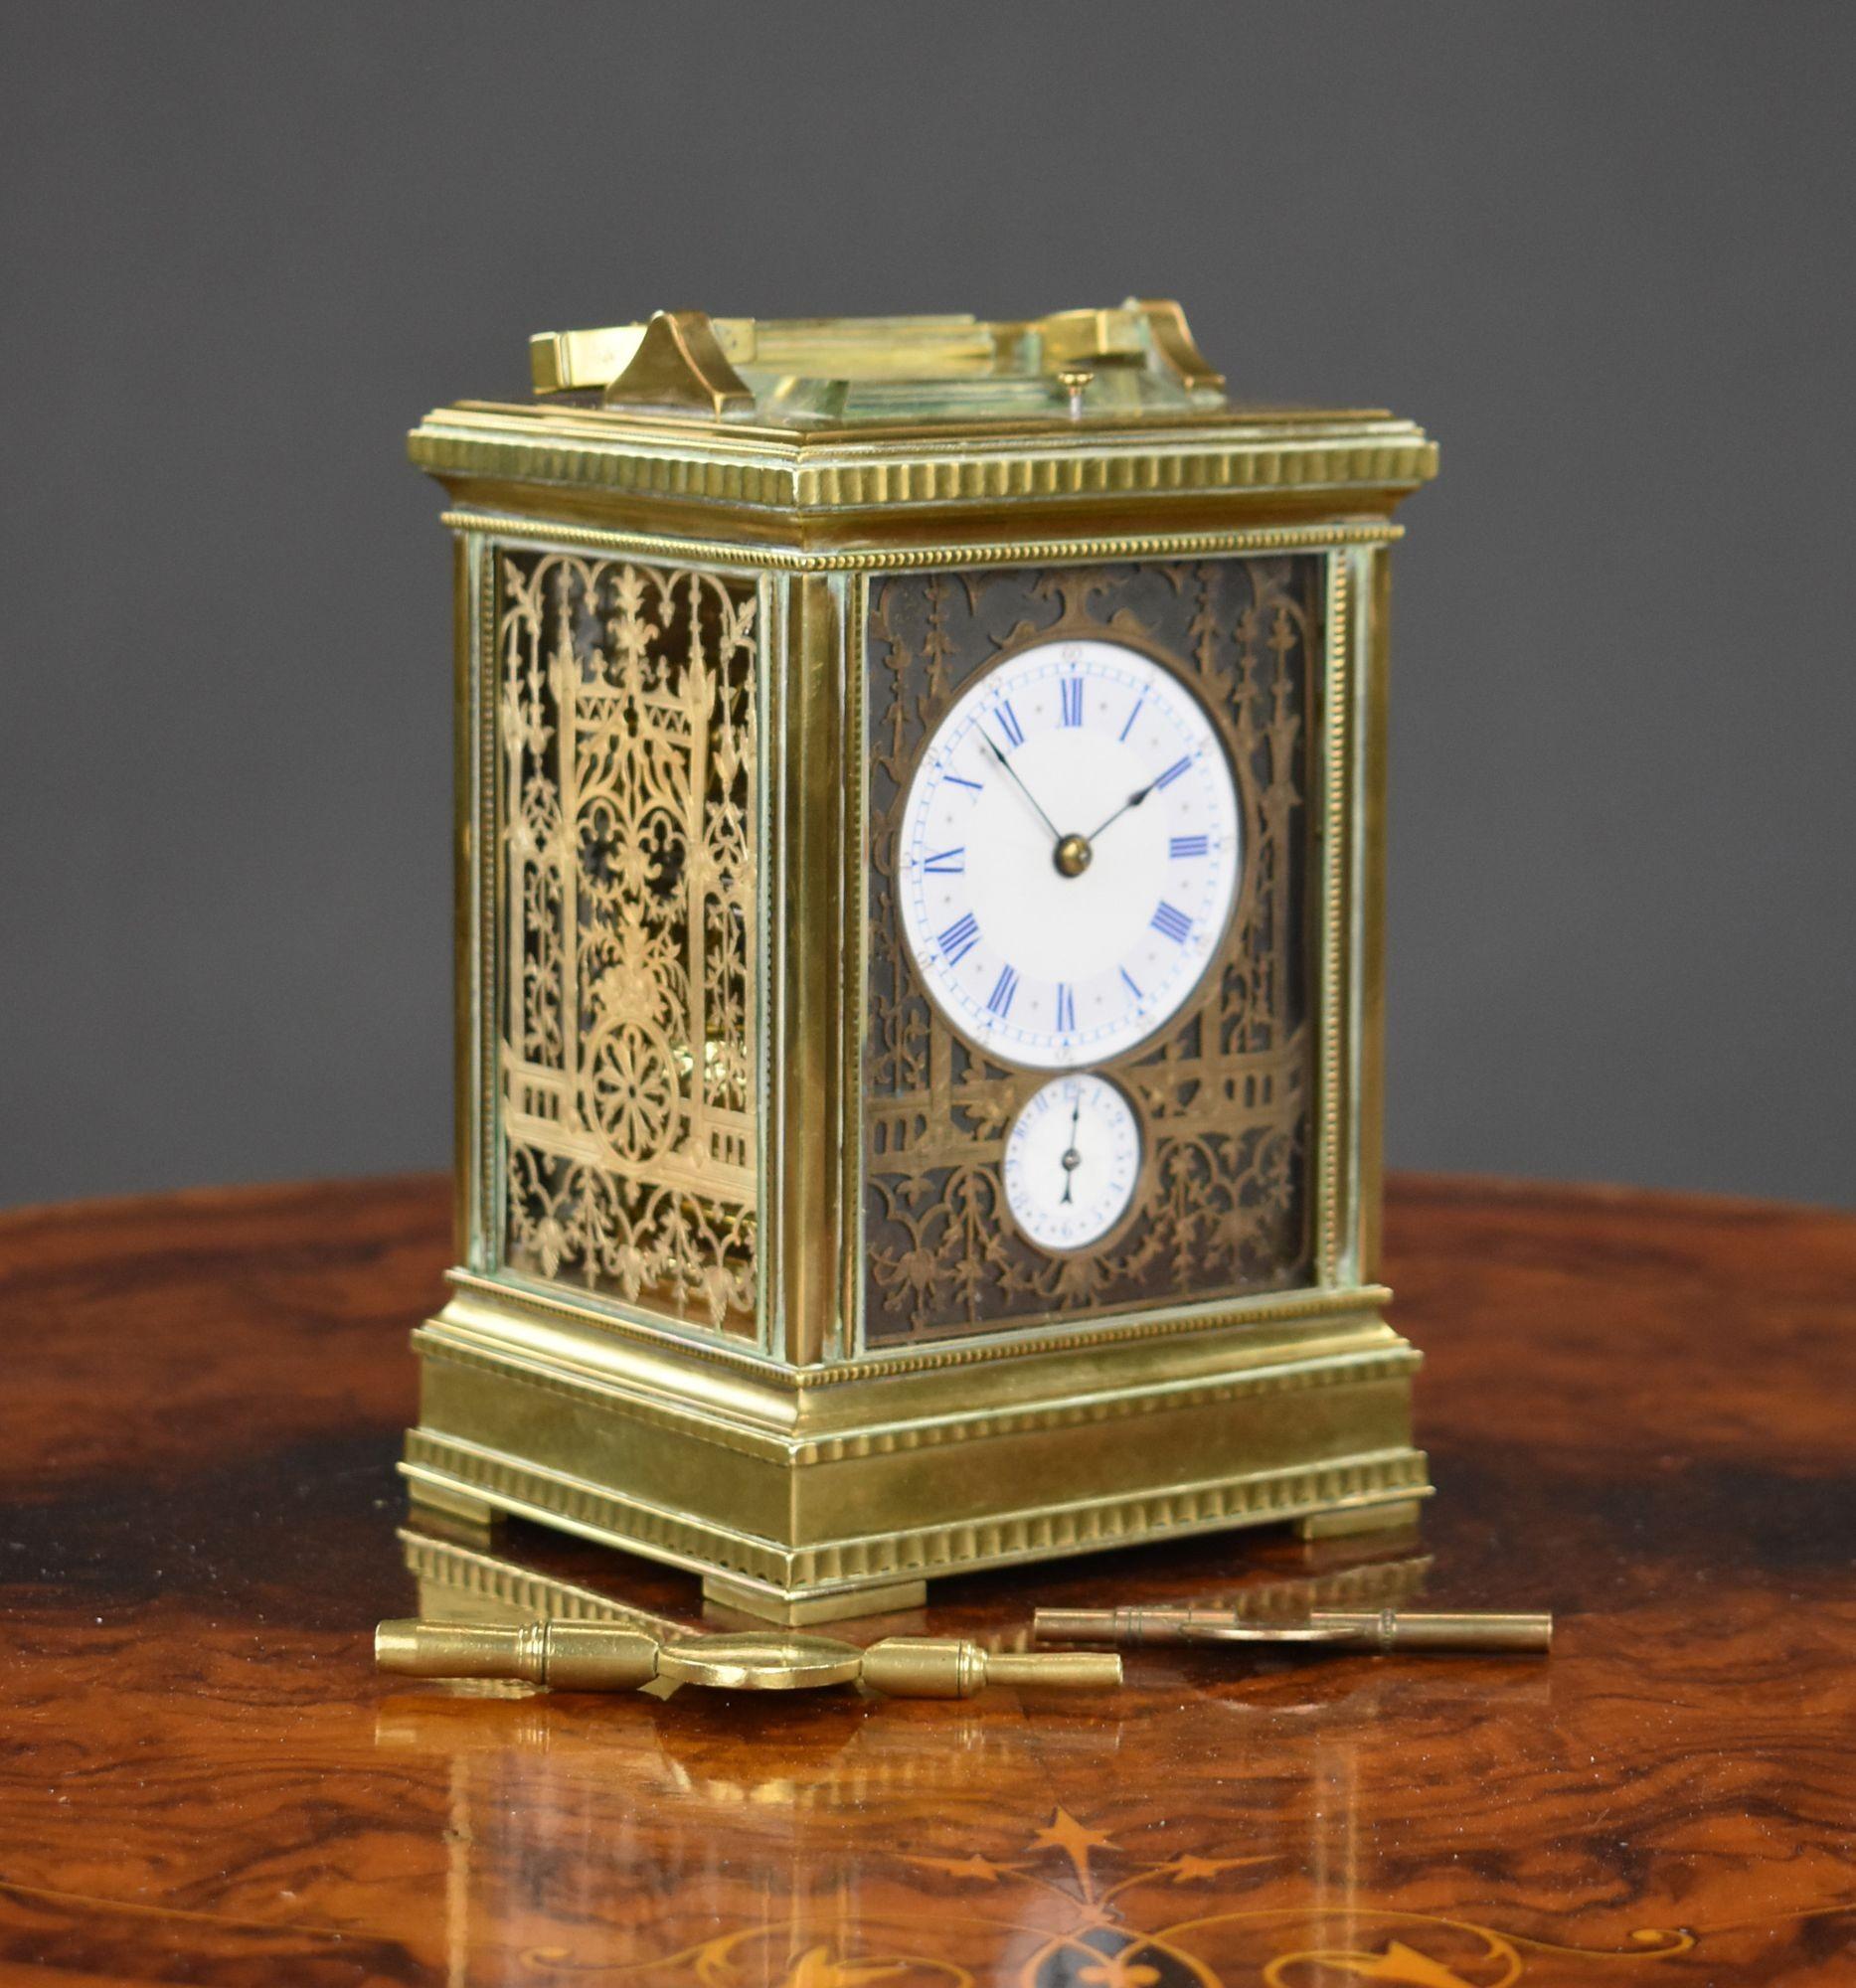 For sale is a good quality 19th century French Grande-Sonnerie Carriage clock retailed by Hunt & Roskell, London. The clock is in very good condition remaining in full working order. It comes complete with its original carrying case and extensive